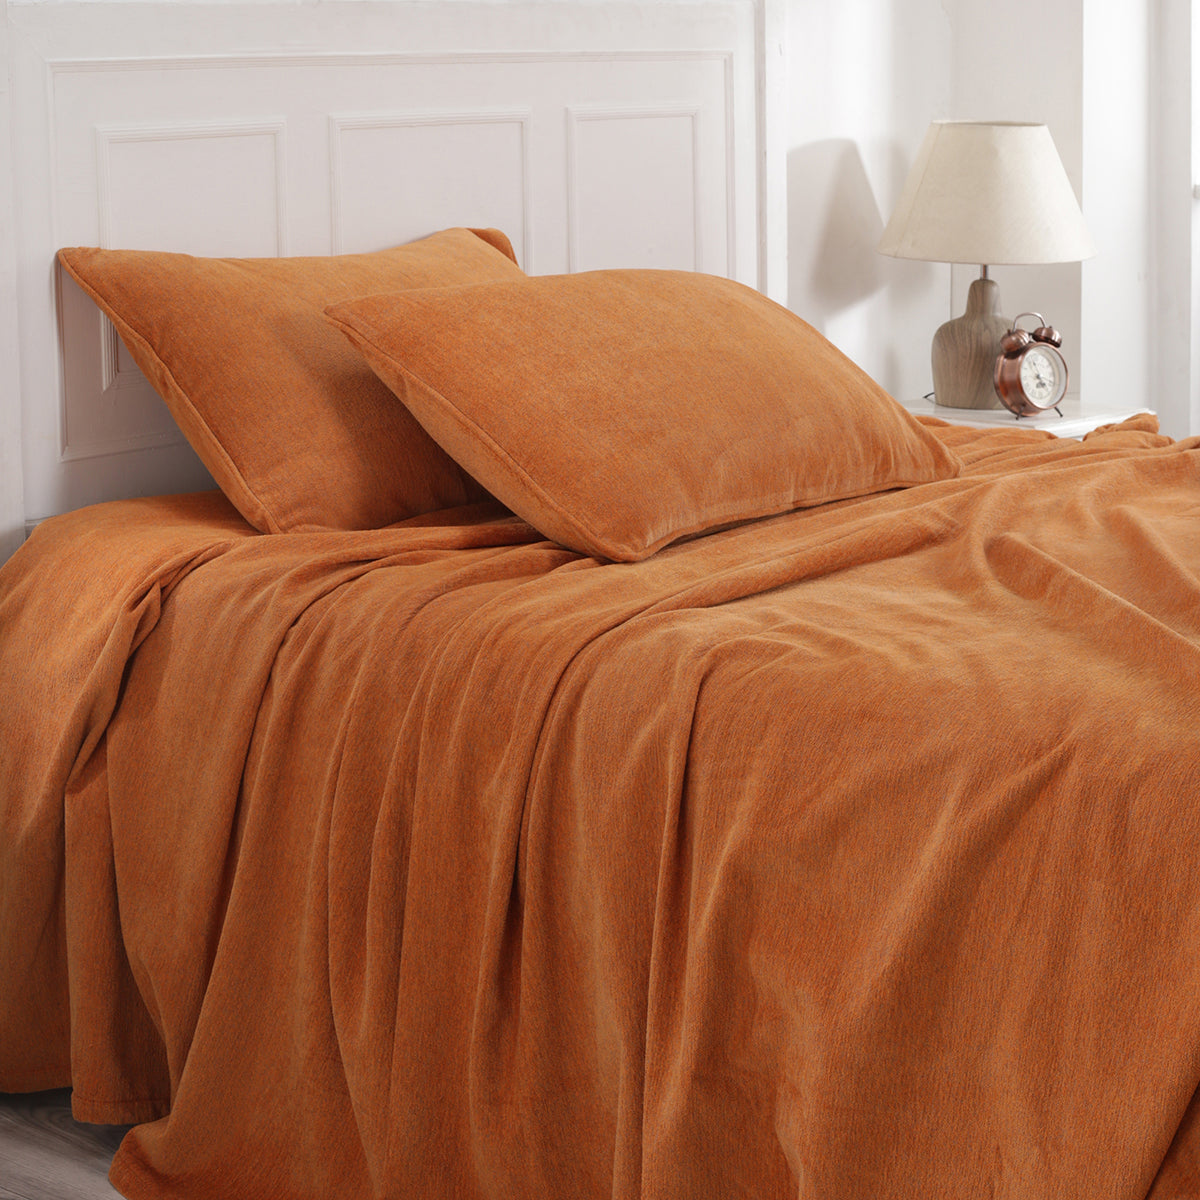 Charlotte Woven Apricot Bed Cover/Blanket